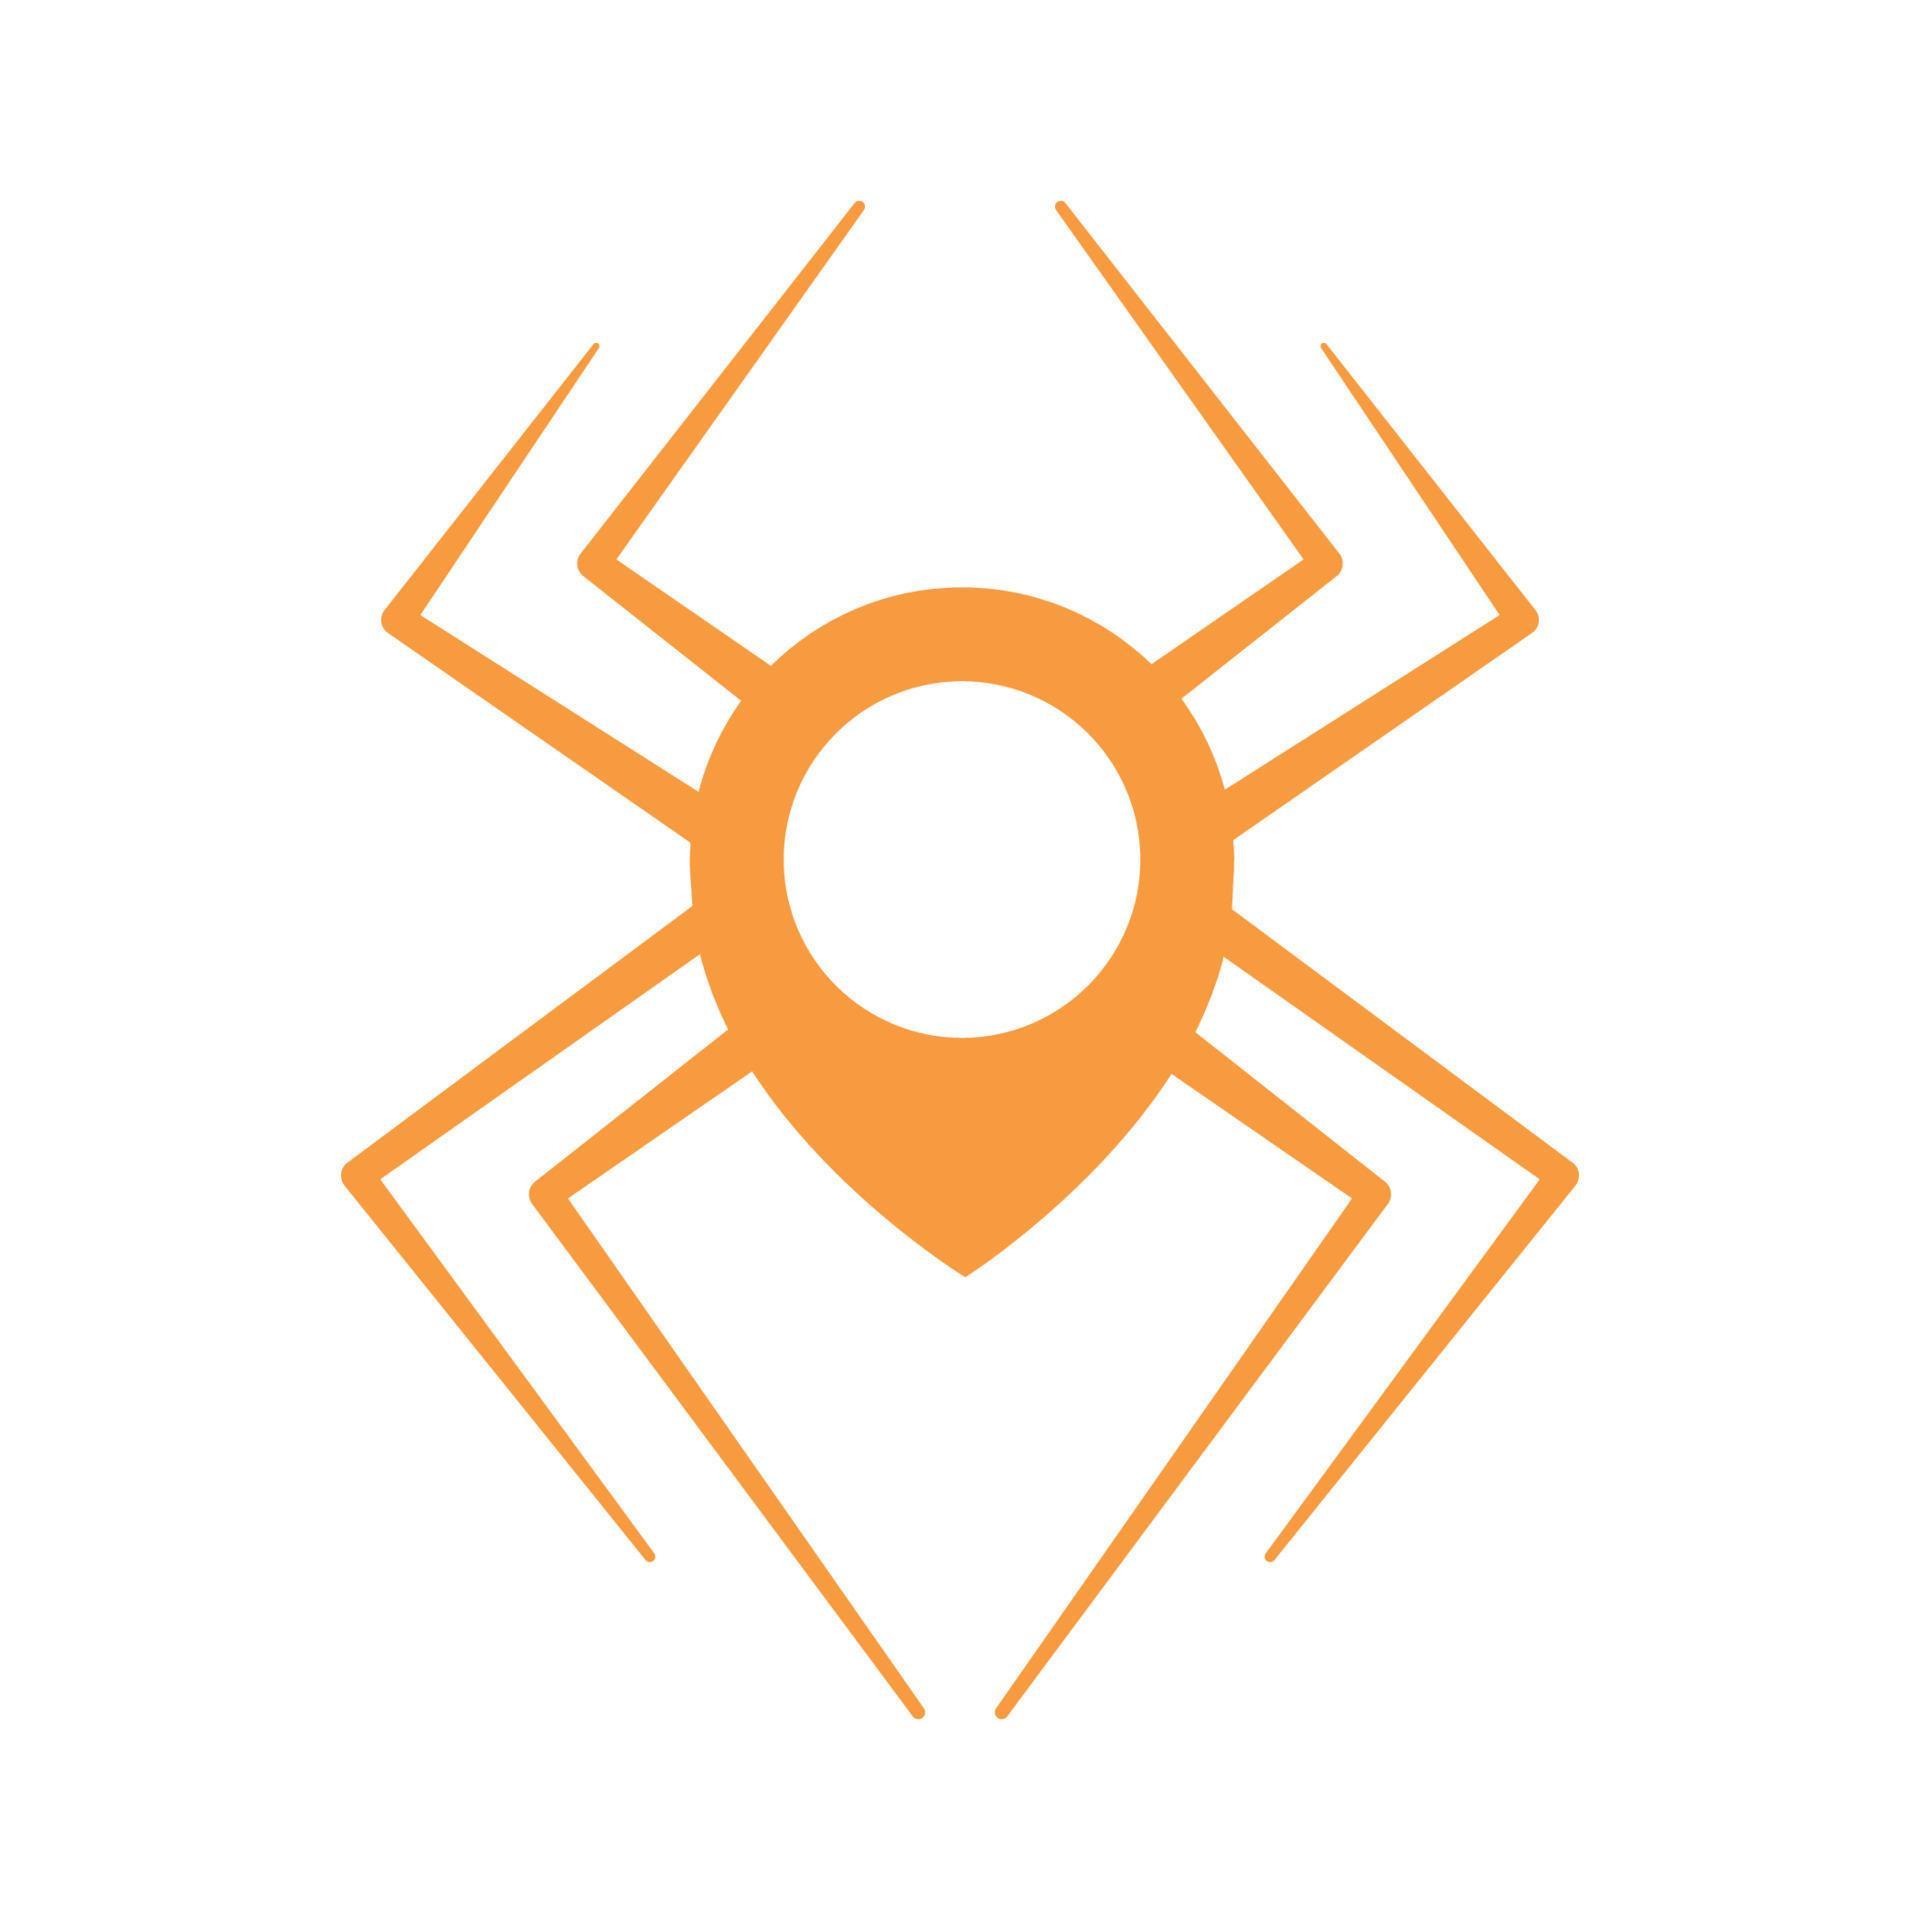 Spider With Map Or Pin Or Location Logo Illustration Design Vector 